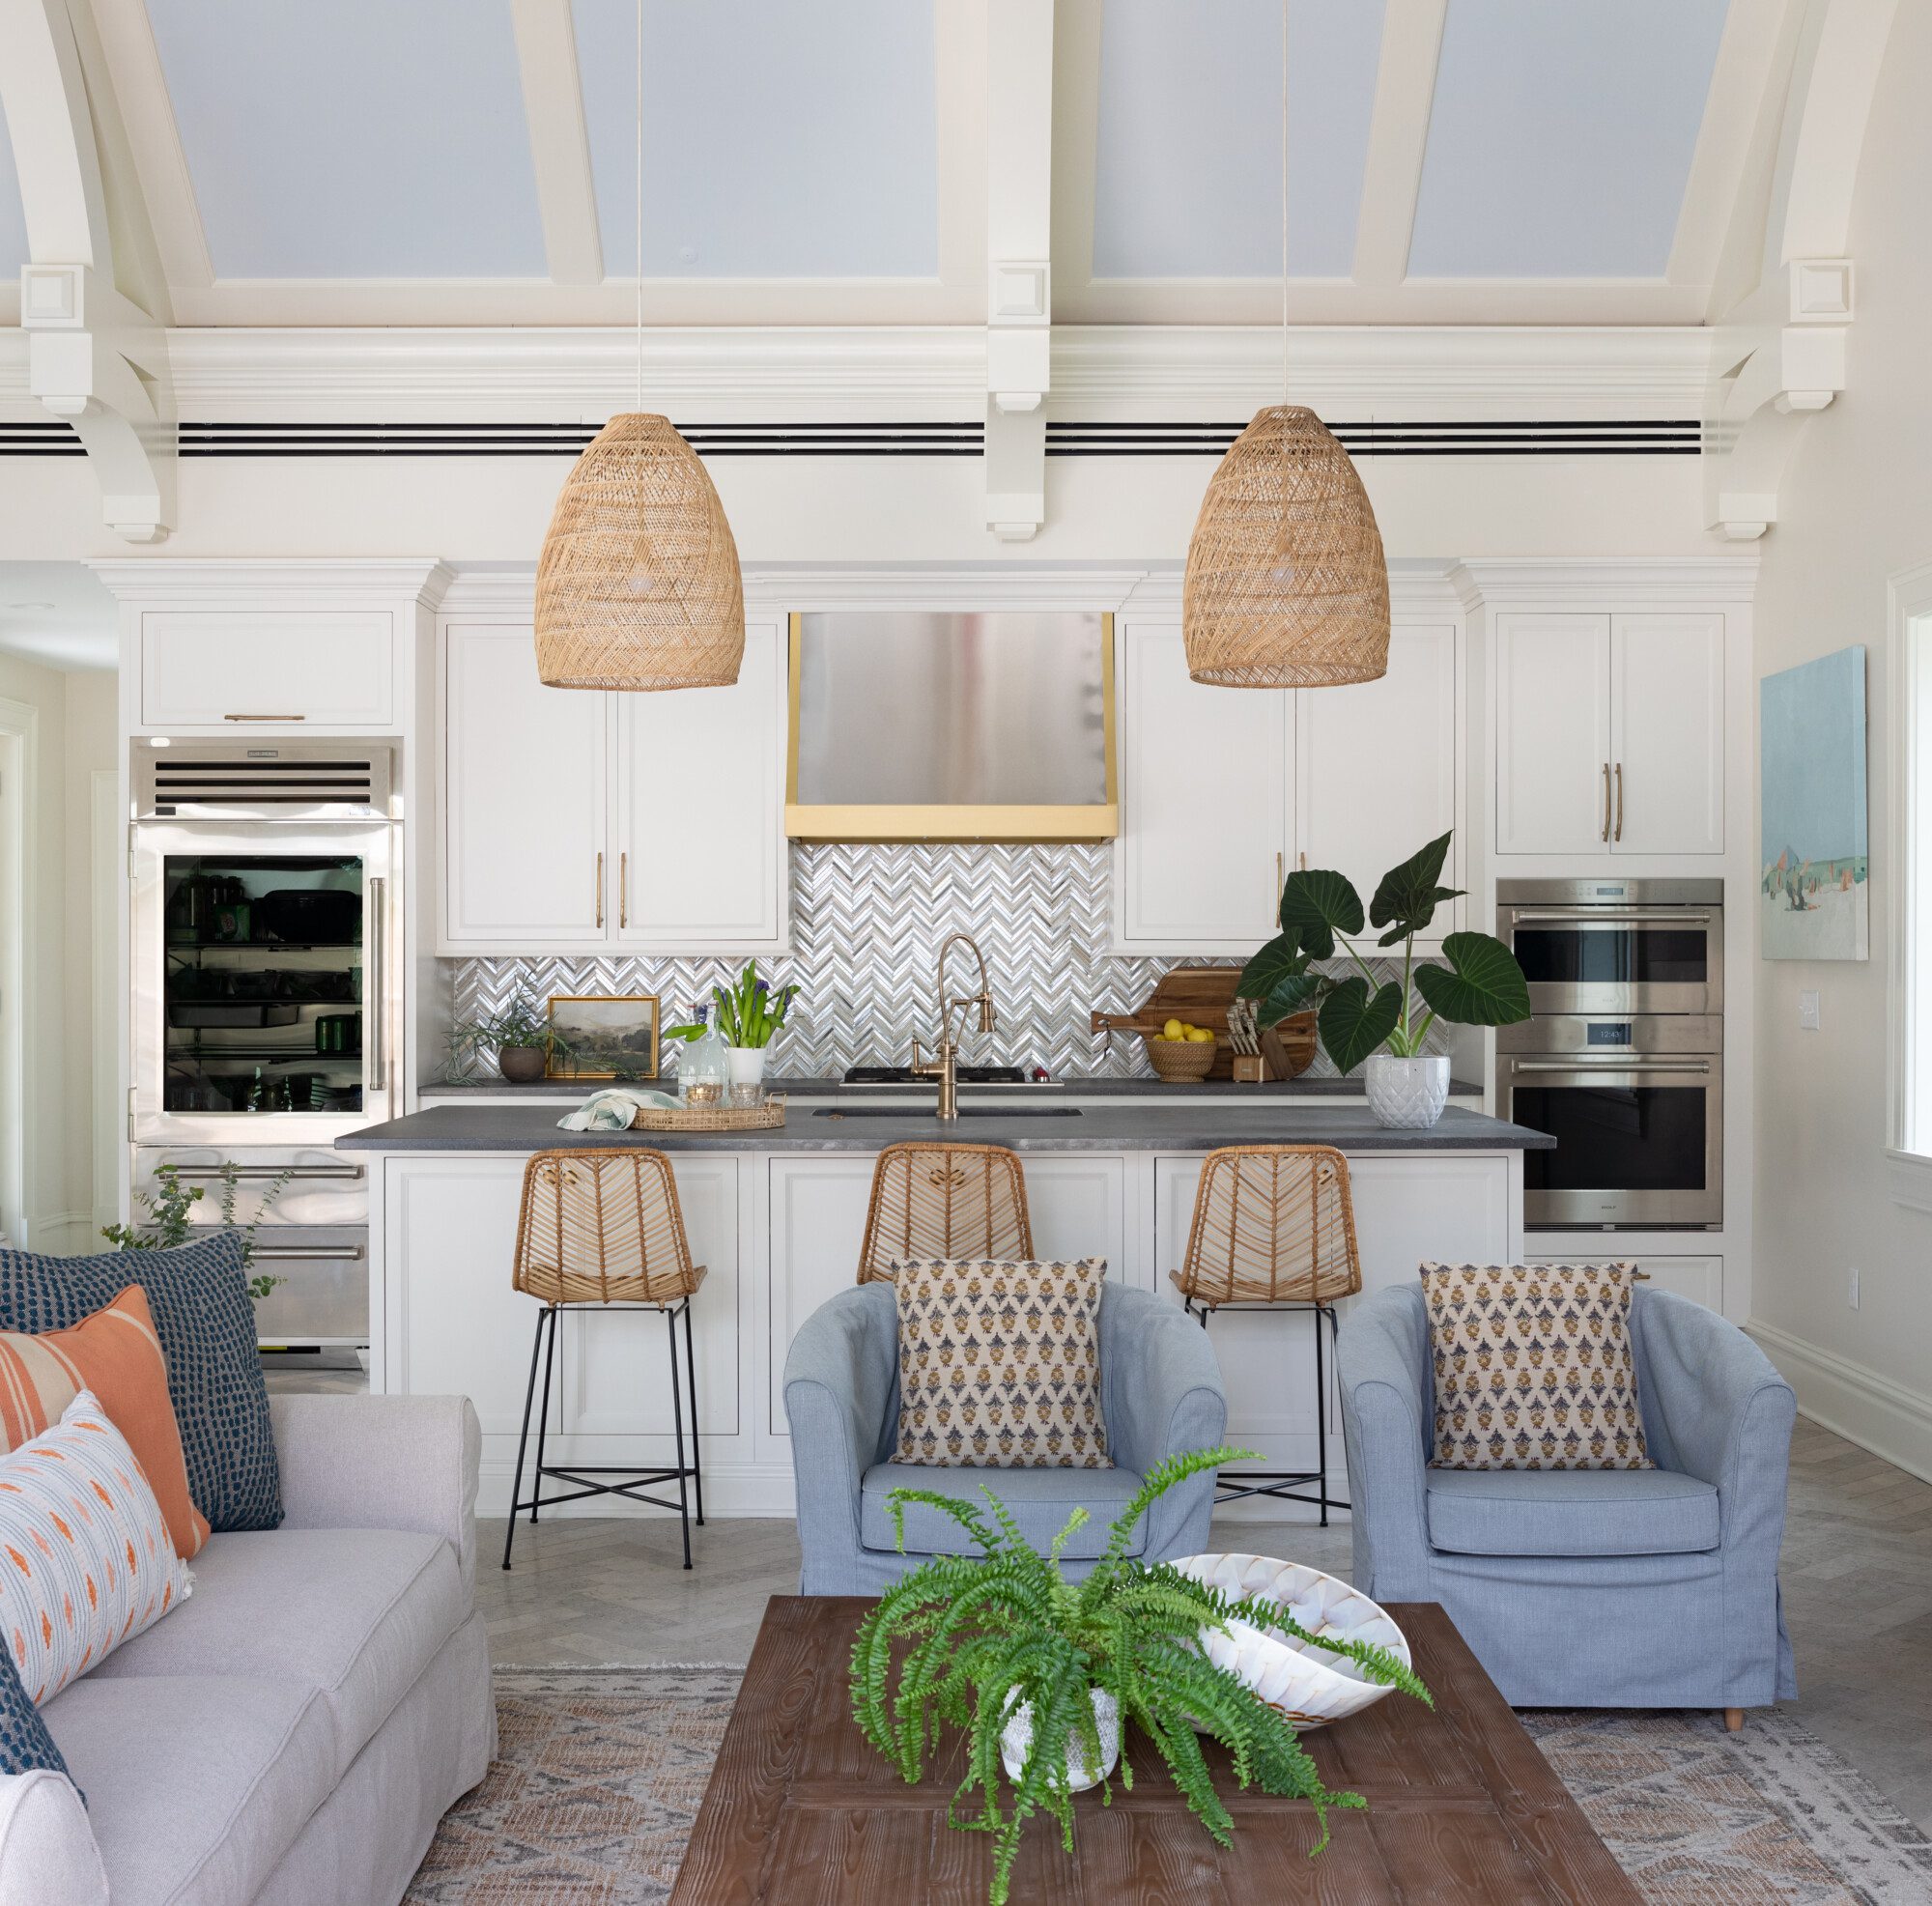 Bright coastal kitchen and seating area